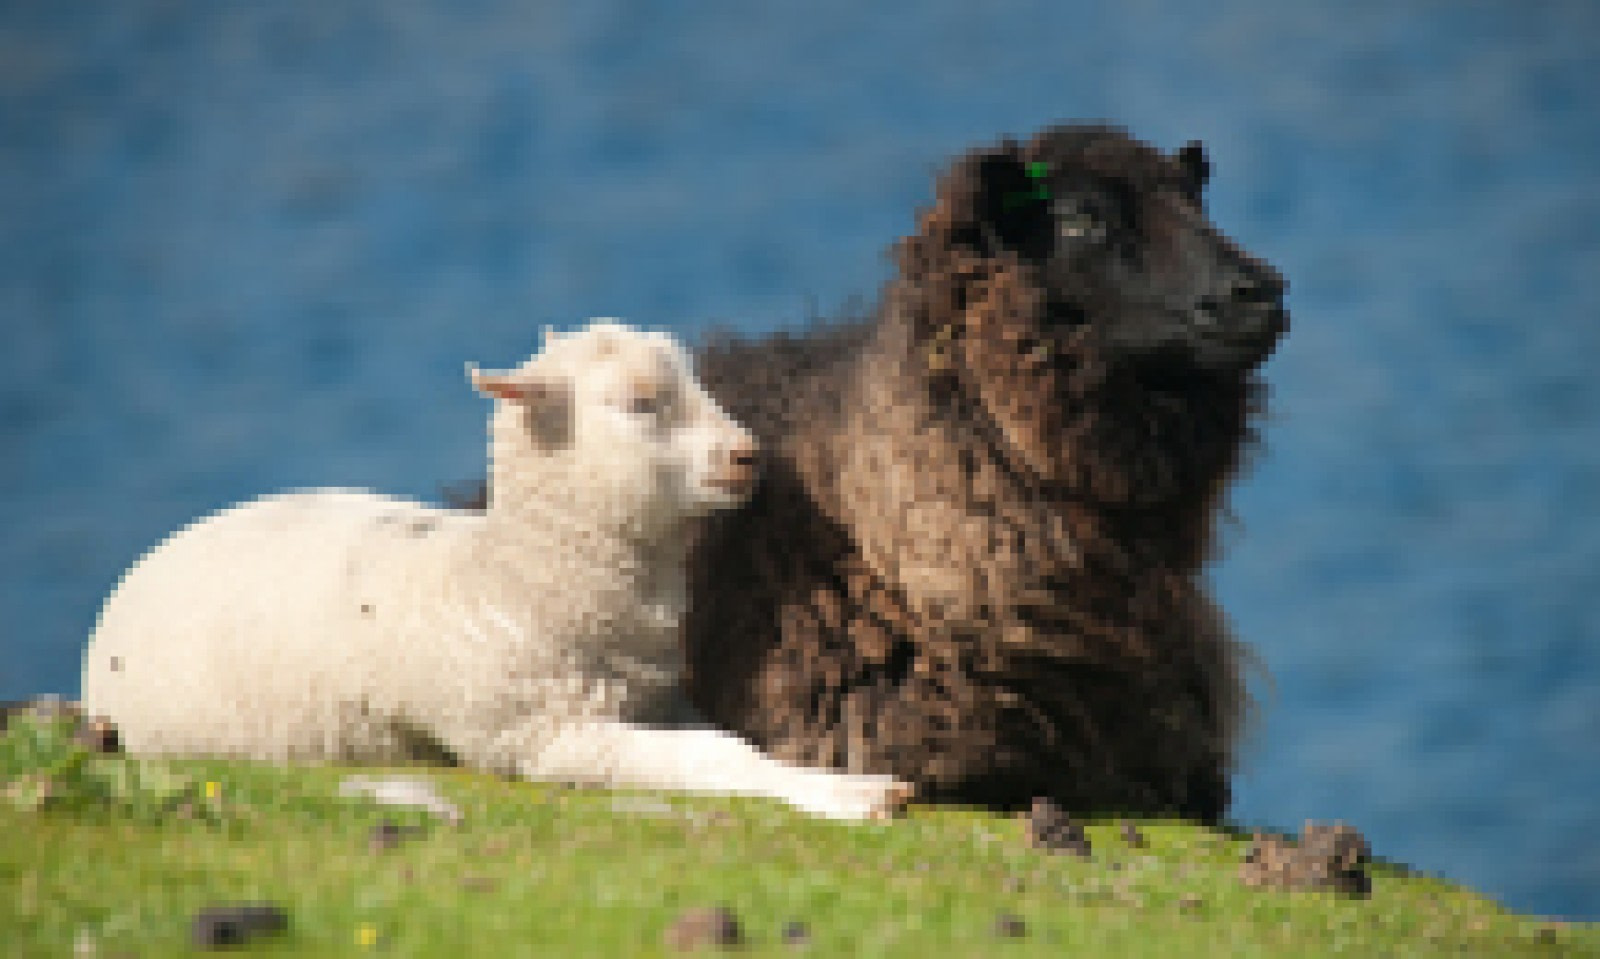 Mother sheep with lamb